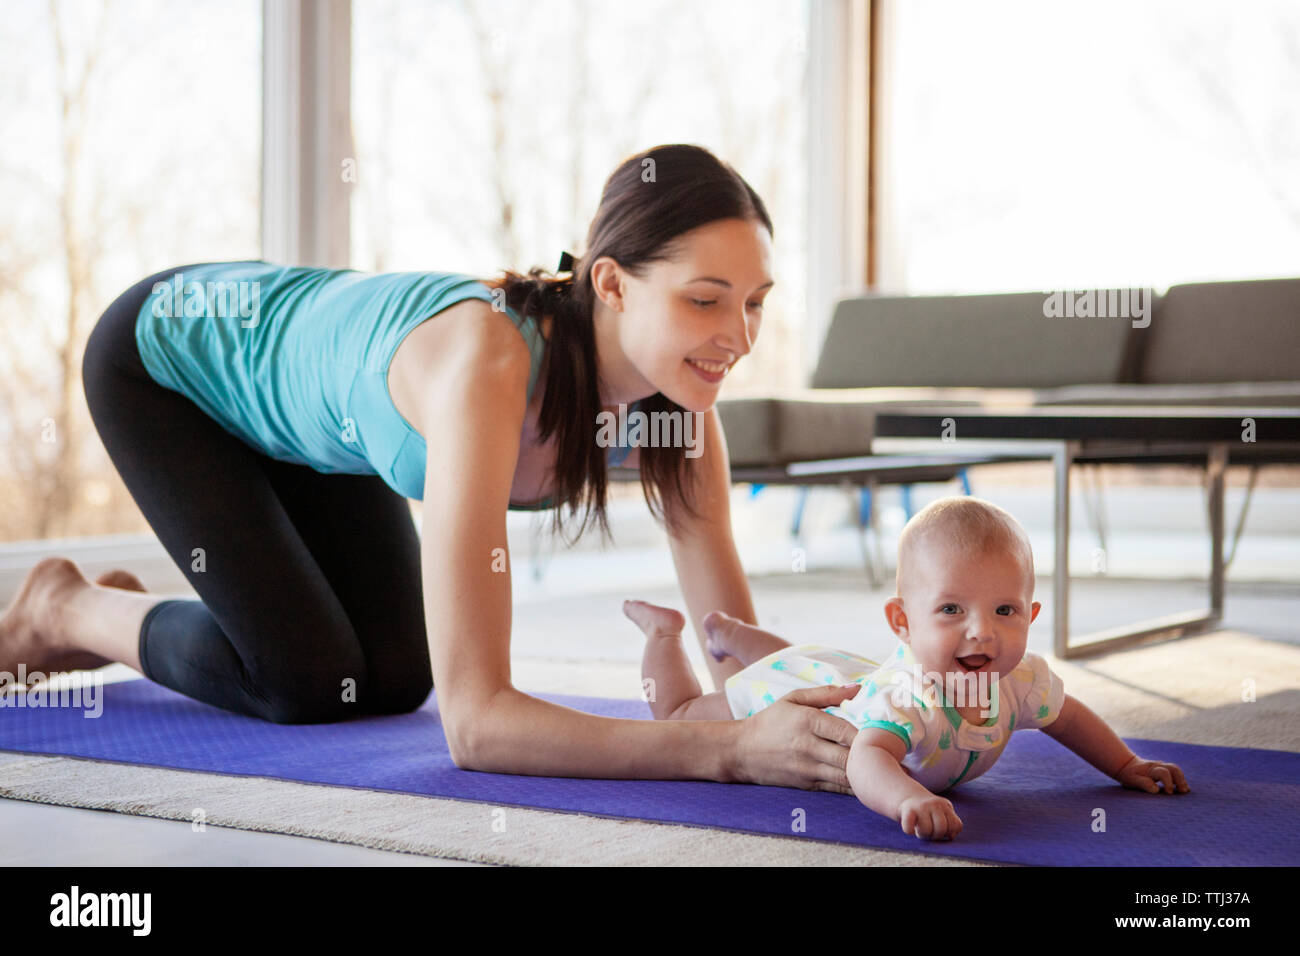 Happy mother holding baby girl while kneeling on exercise mat Stock Photo